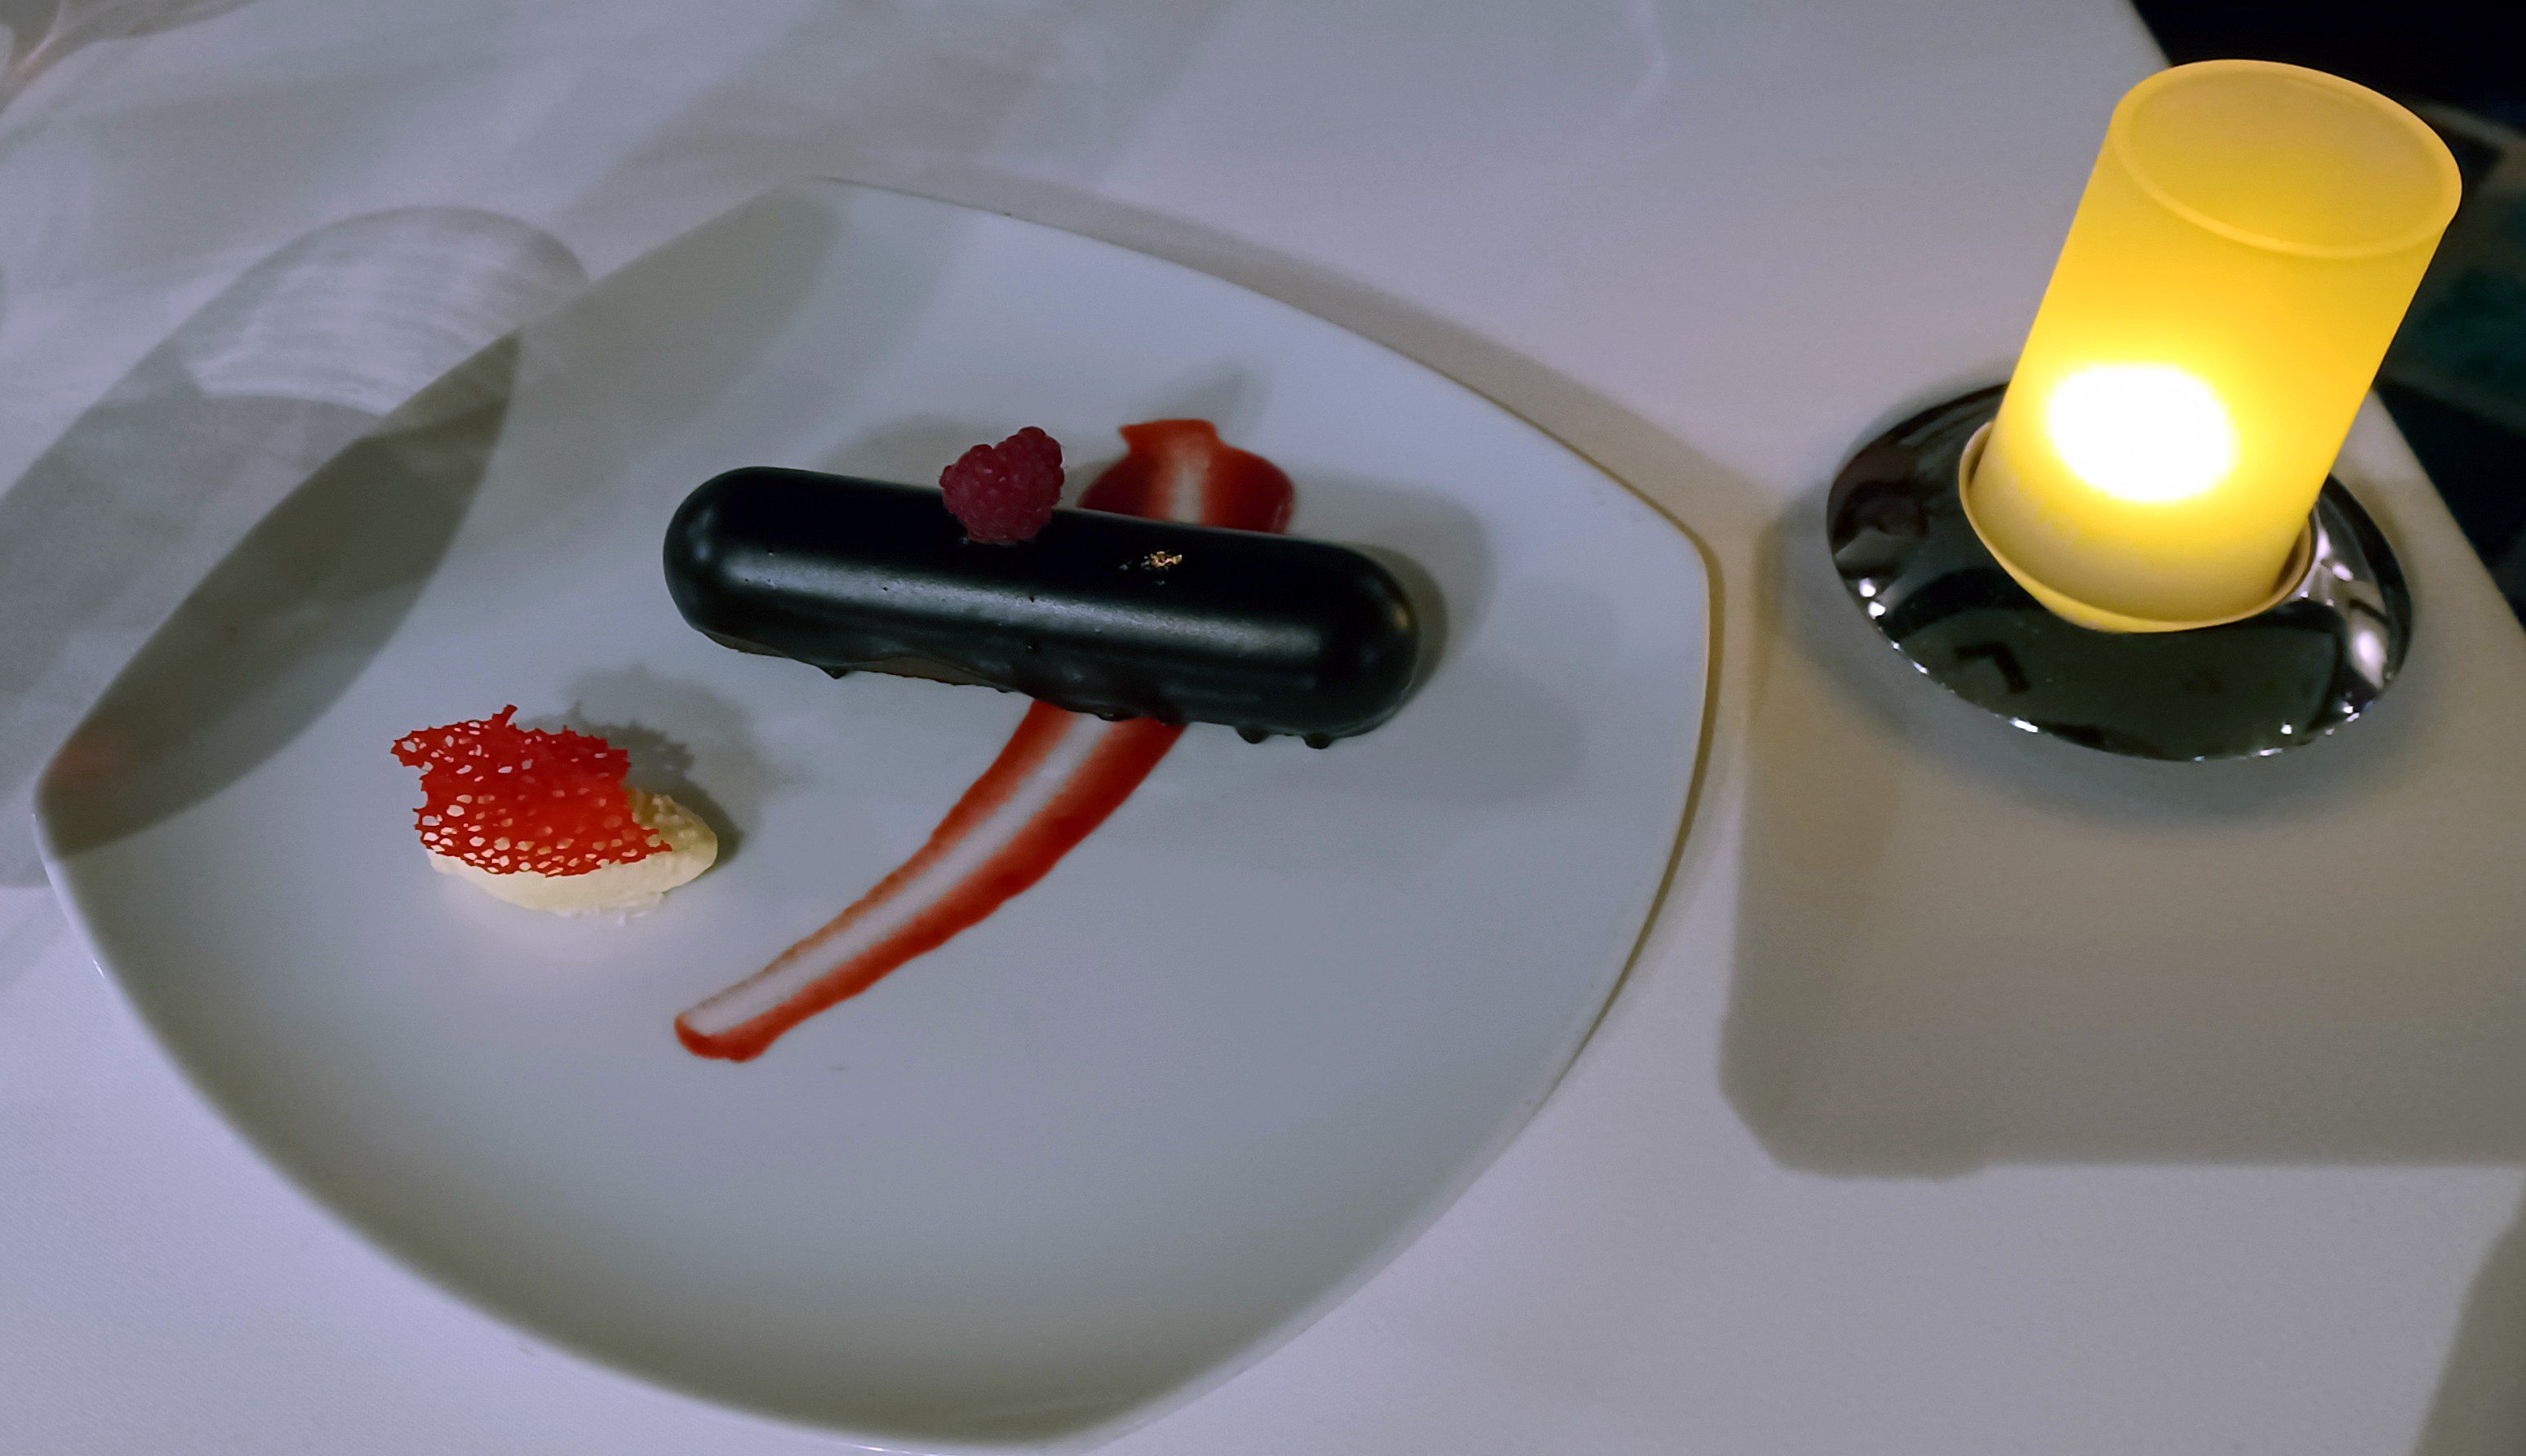 a plate of dessert with a candle and a black object on it